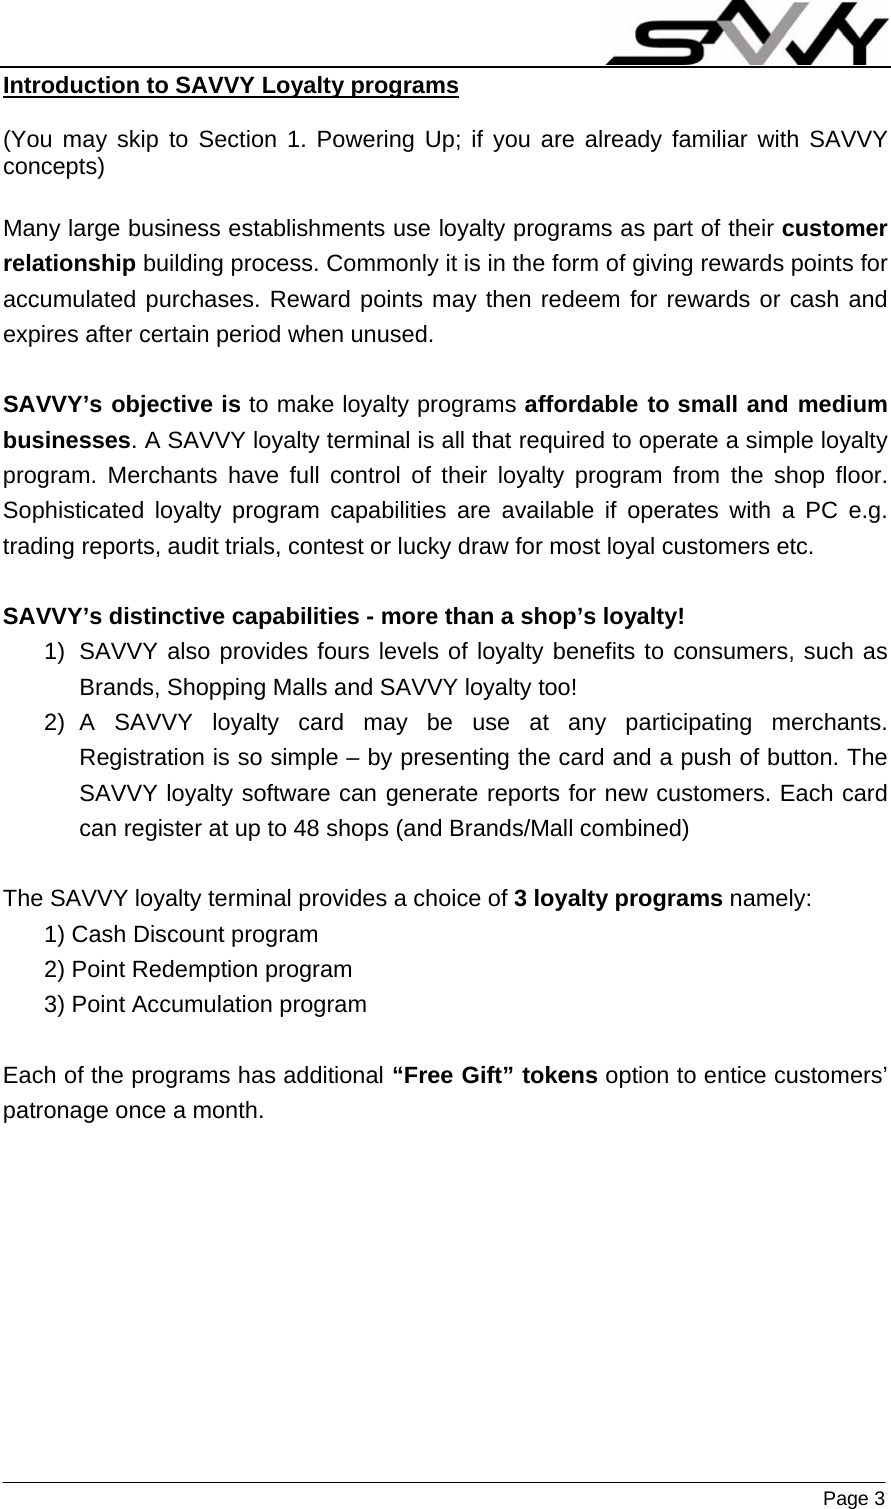                    Page 3  Introduction to SAVVY Loyalty programs   (You may skip to Section 1. Powering Up; if you are already familiar with SAVVY concepts)  Many large business establishments use loyalty programs as part of their customer relationship building process. Commonly it is in the form of giving rewards points for accumulated purchases. Reward points may then redeem for rewards or cash and expires after certain period when unused.  SAVVY’s objective is to make loyalty programs affordable to small and medium businesses. A SAVVY loyalty terminal is all that required to operate a simple loyalty program. Merchants have full control of their loyalty program from the shop floor. Sophisticated loyalty program capabilities are available if operates with a PC e.g. trading reports, audit trials, contest or lucky draw for most loyal customers etc.  SAVVY’s distinctive capabilities - more than a shop’s loyalty!  1)  SAVVY also provides fours levels of loyalty benefits to consumers, such as Brands, Shopping Malls and SAVVY loyalty too! 2) A SAVVY loyalty card may be use at any participating merchants. Registration is so simple – by presenting the card and a push of button. The SAVVY loyalty software can generate reports for new customers. Each card can register at up to 48 shops (and Brands/Mall combined)  The SAVVY loyalty terminal provides a choice of 3 loyalty programs namely: 1) Cash Discount program 2) Point Redemption program 3) Point Accumulation program  Each of the programs has additional “Free Gift” tokens option to entice customers’ patronage once a month.  